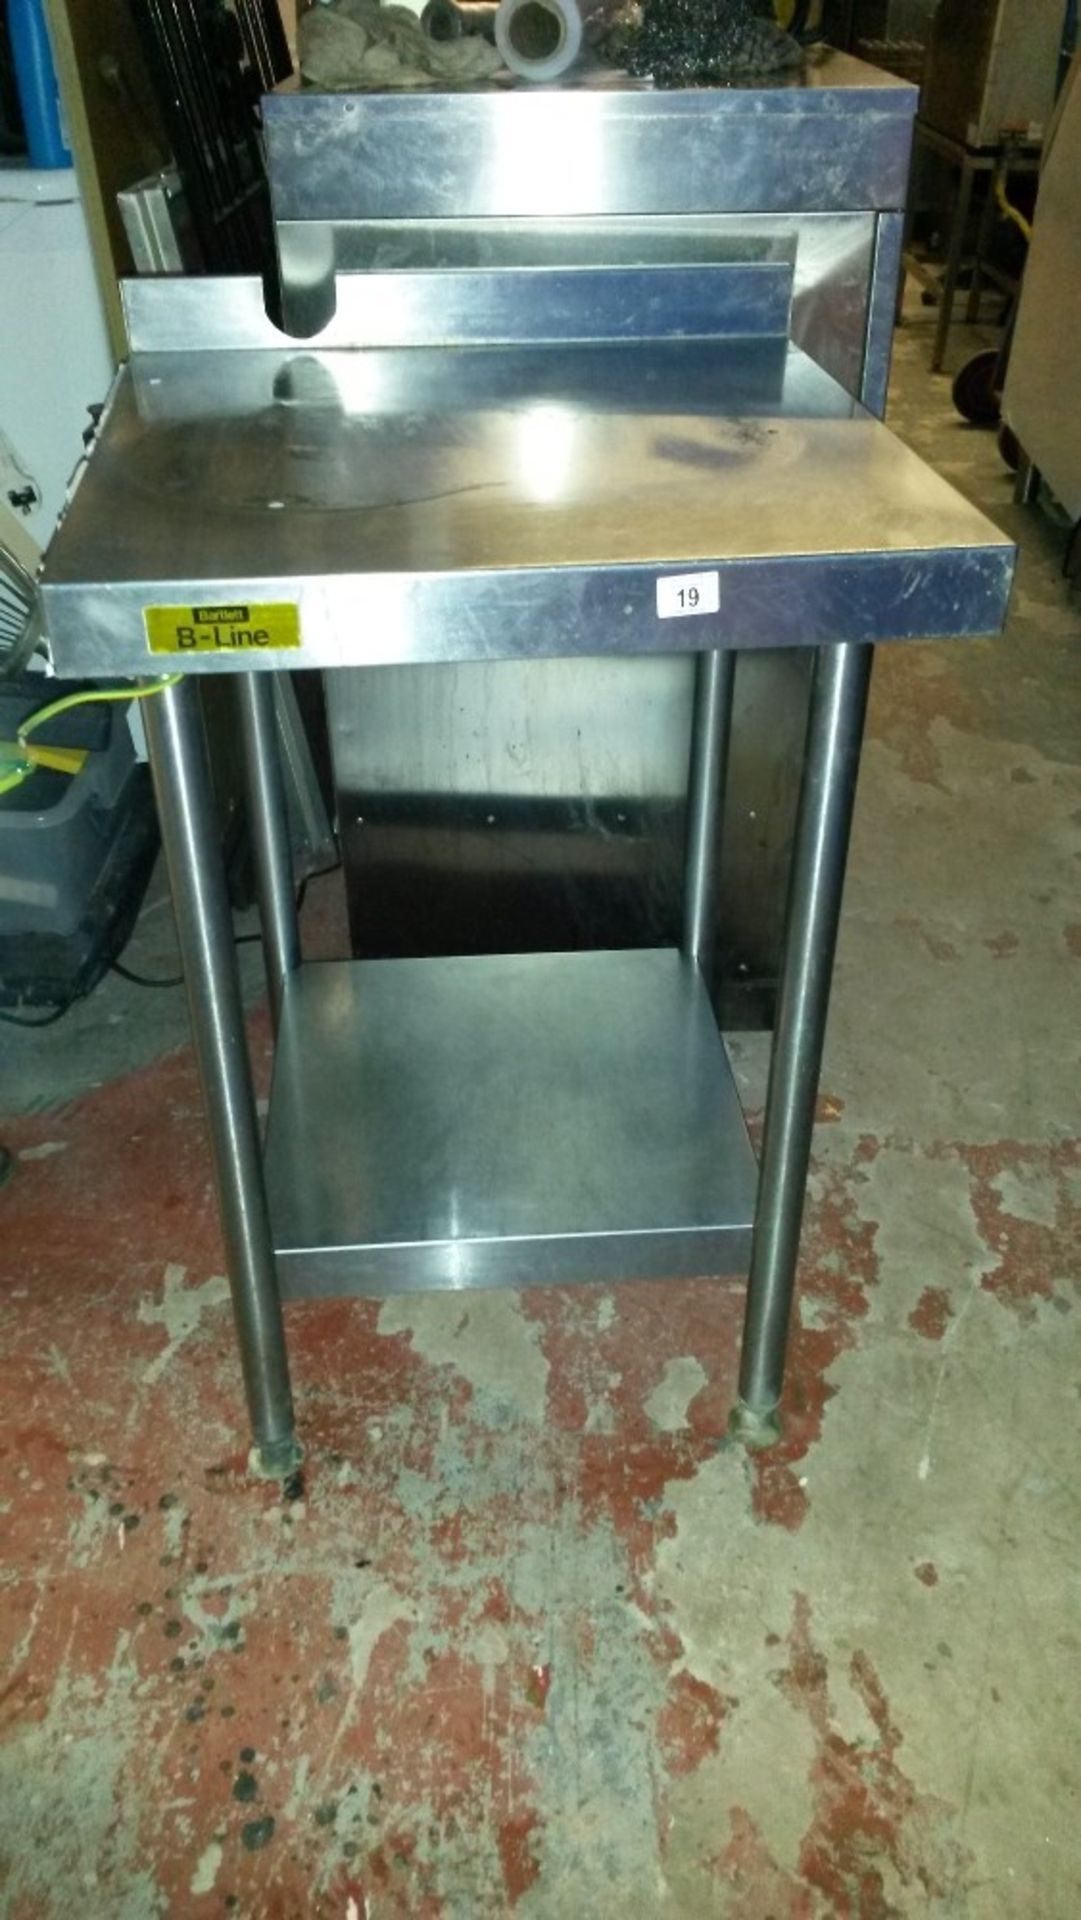 Bartlett B Line stainless steel table 600mm x 600mm with undershelf - Image 2 of 2